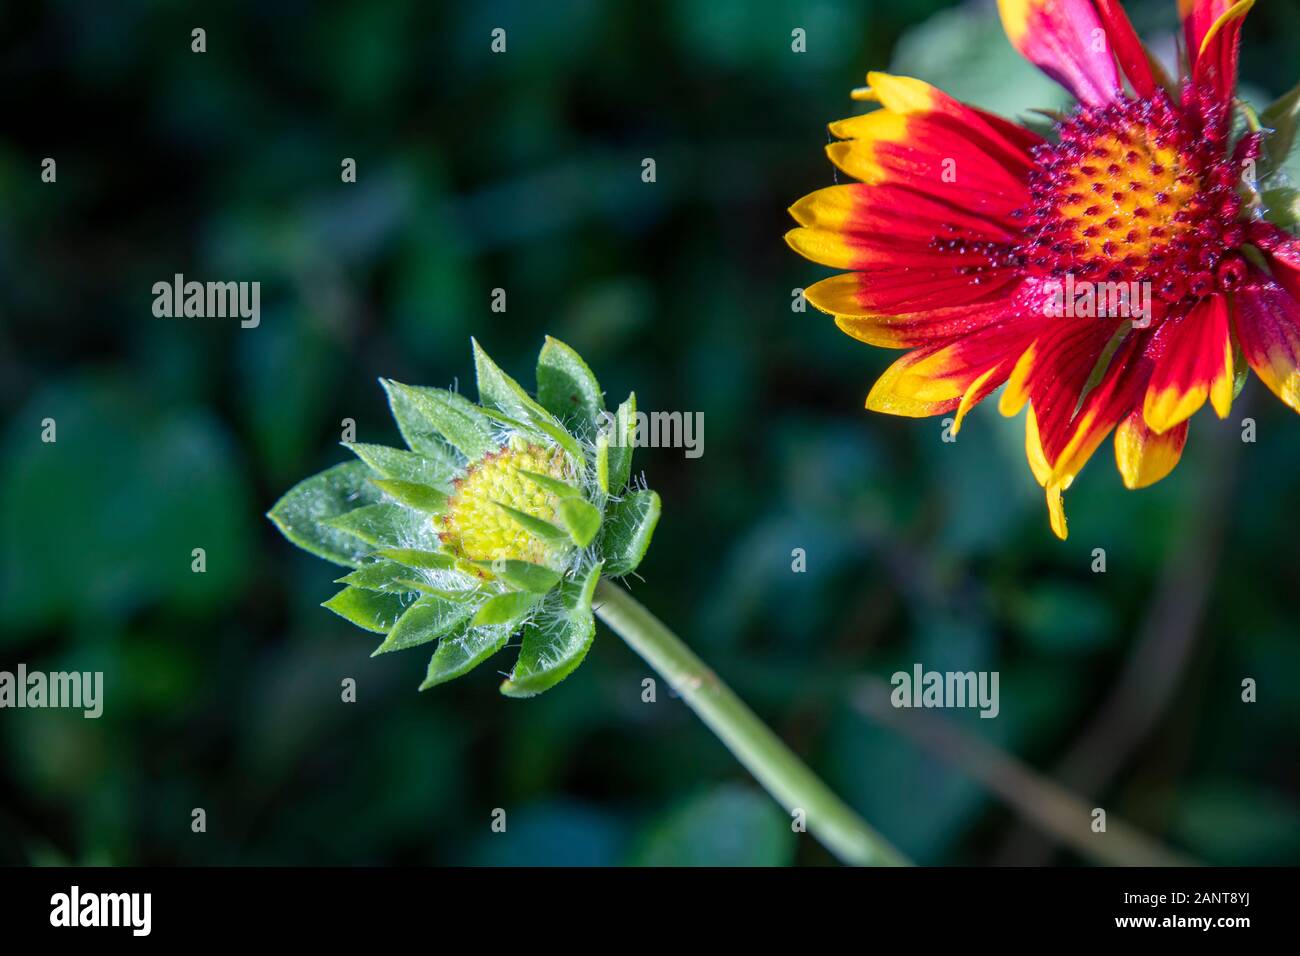 Gaillardia pulchella Indian blanket flower and bud close up on a blurred background Stock Photo